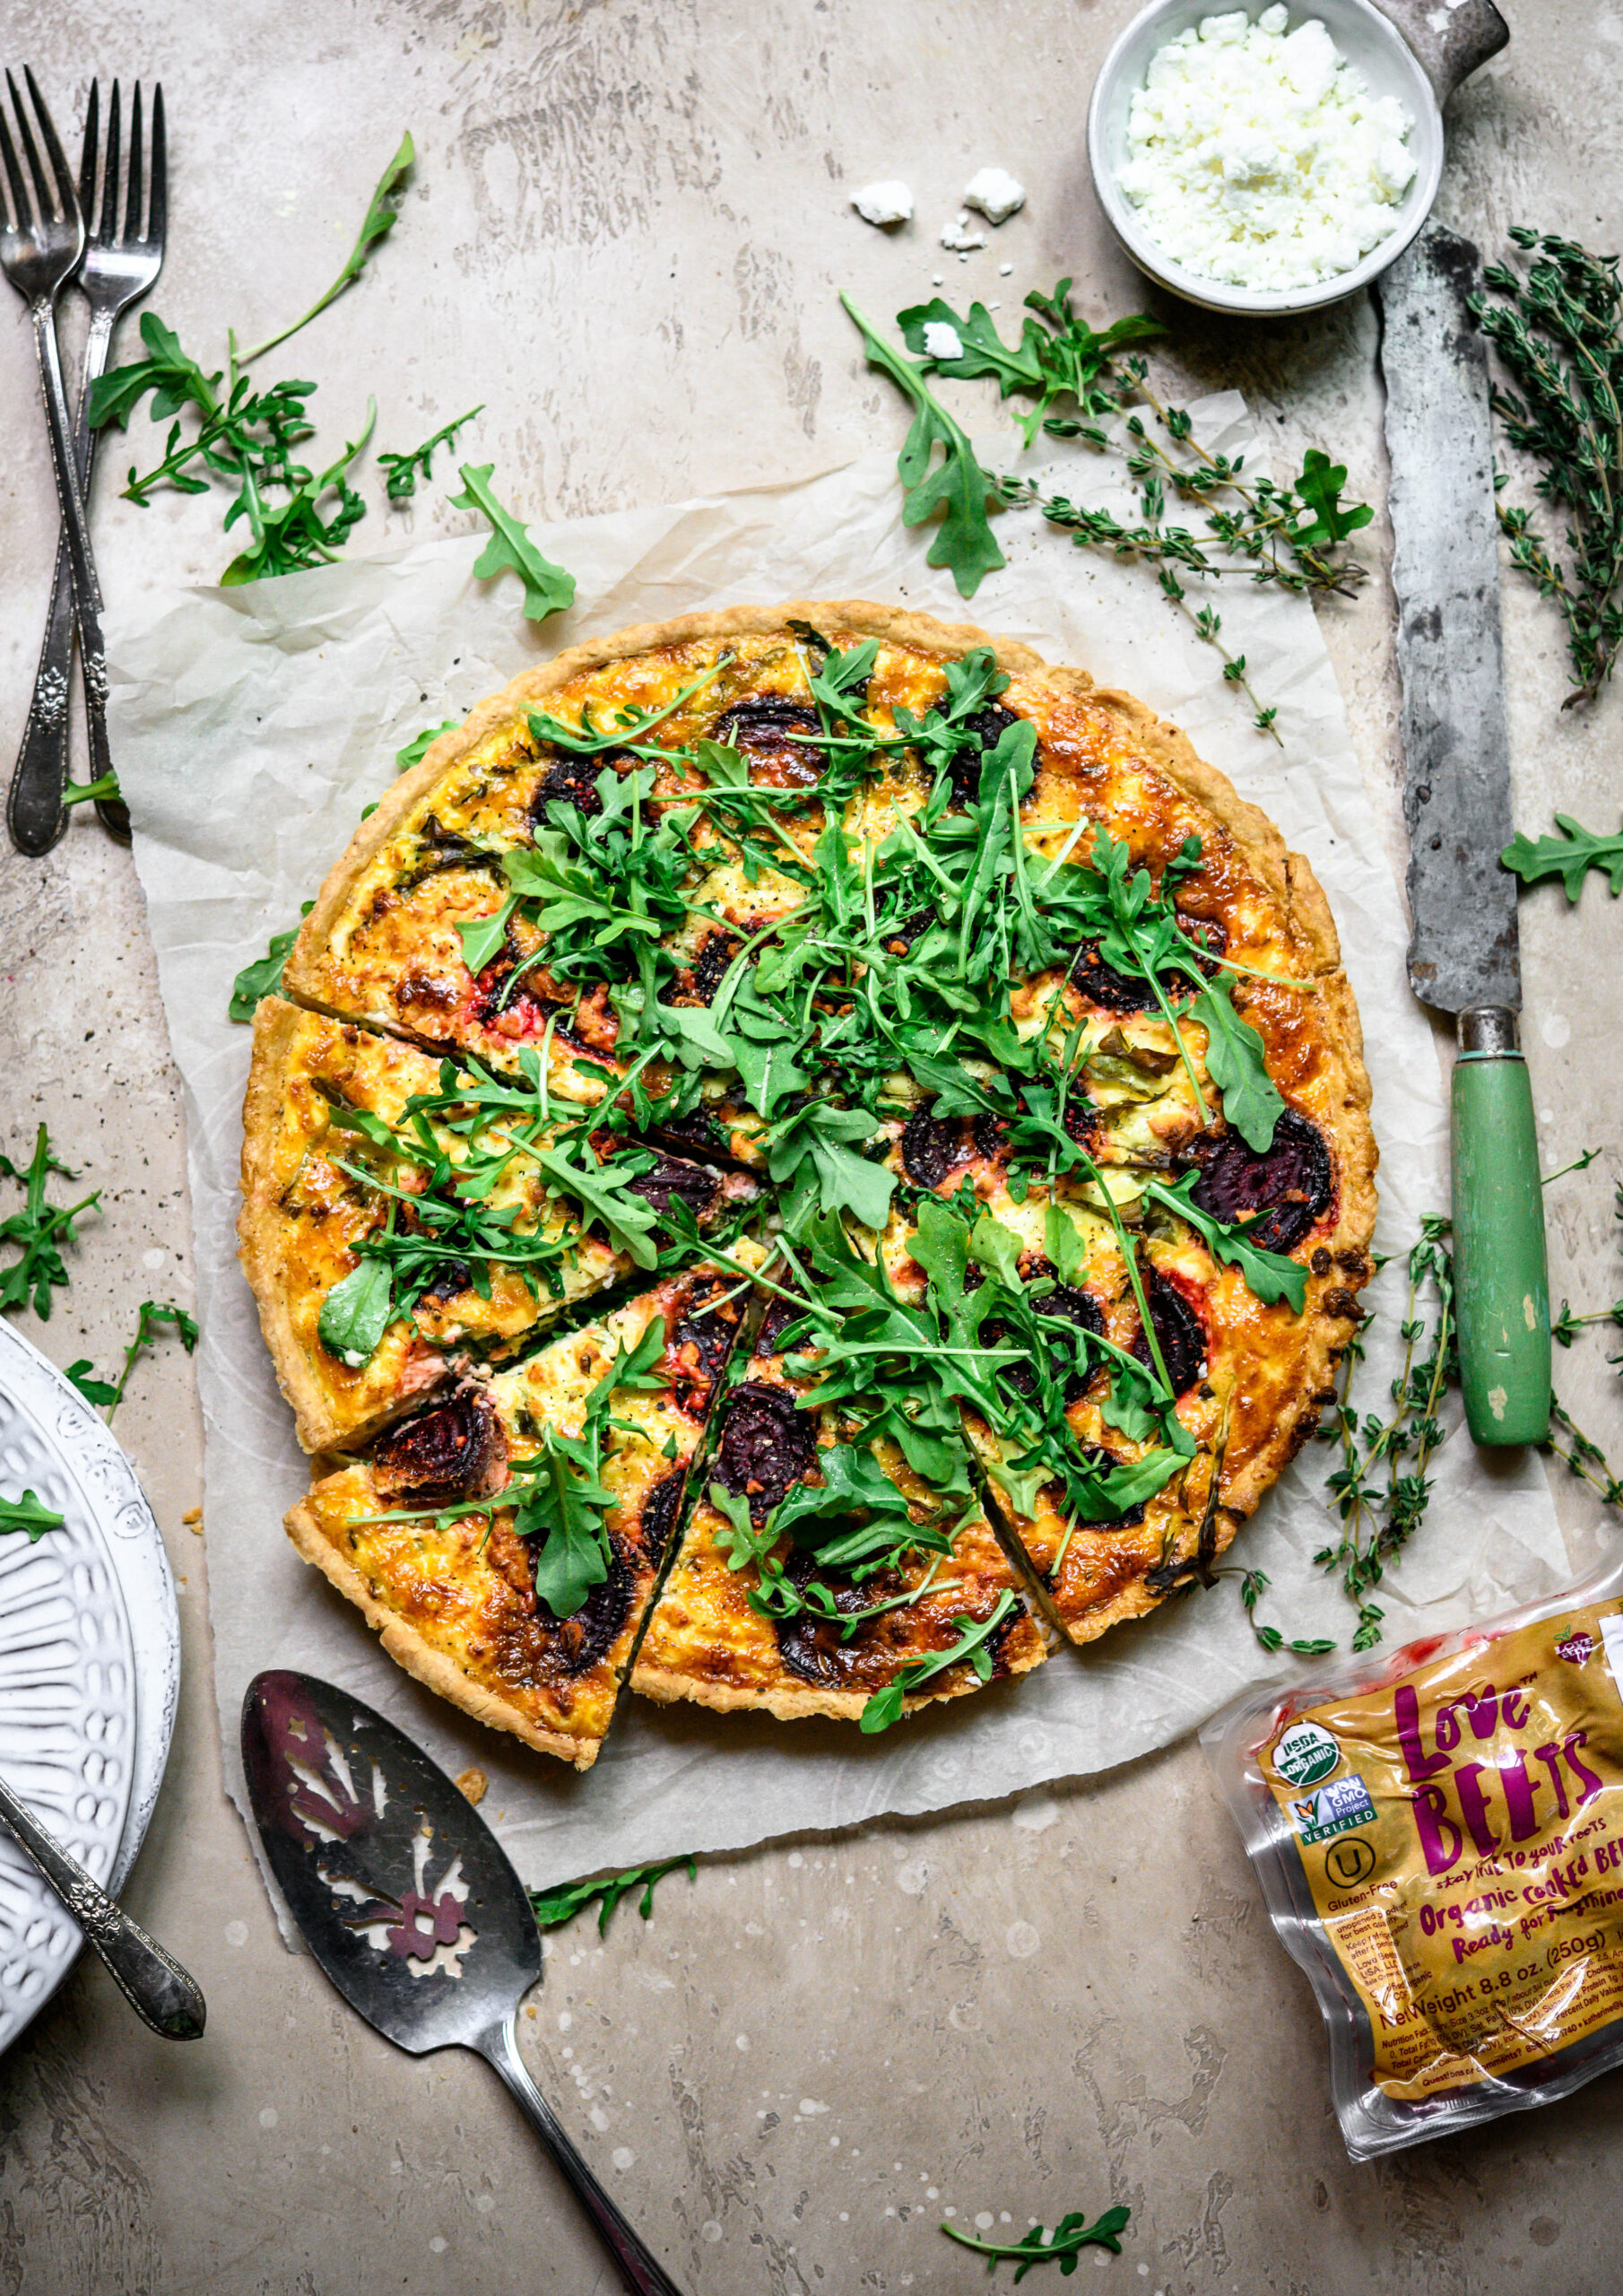 Beet, Arugula, and Goat Cheese Quiche from Love Beets